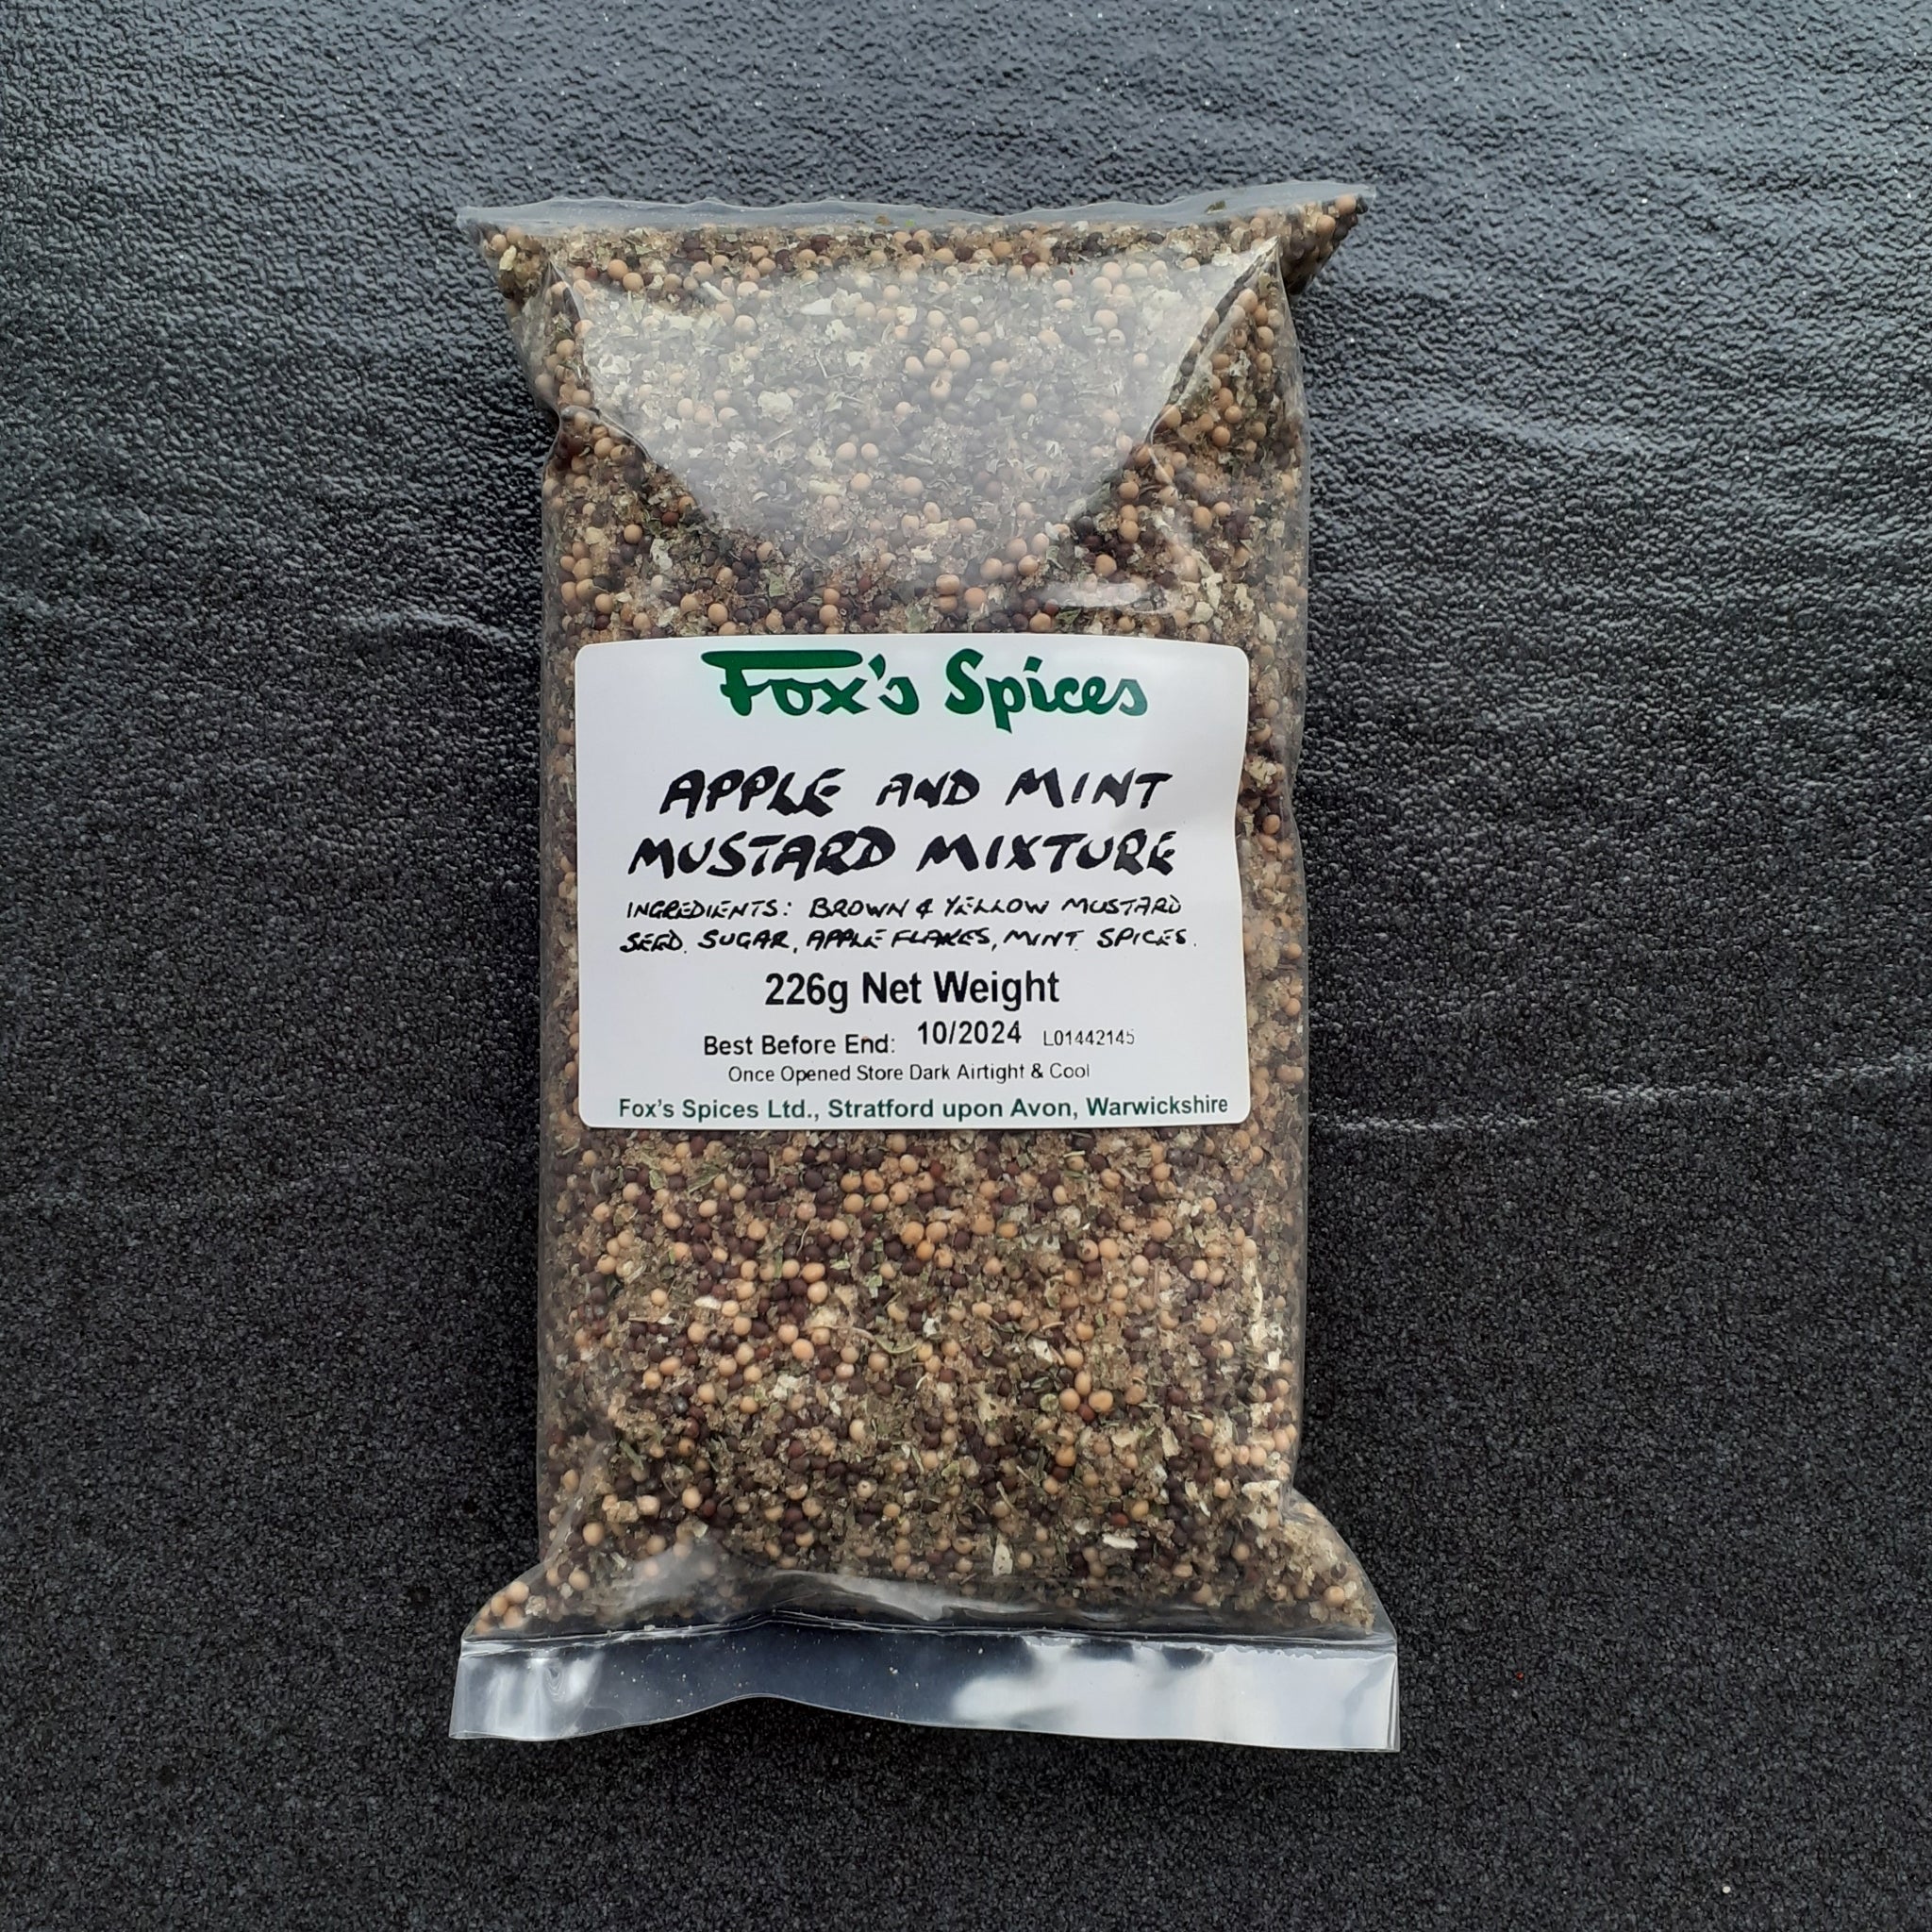 Fox's Spices Apple & mint mustards mixture sold in 226g bags.